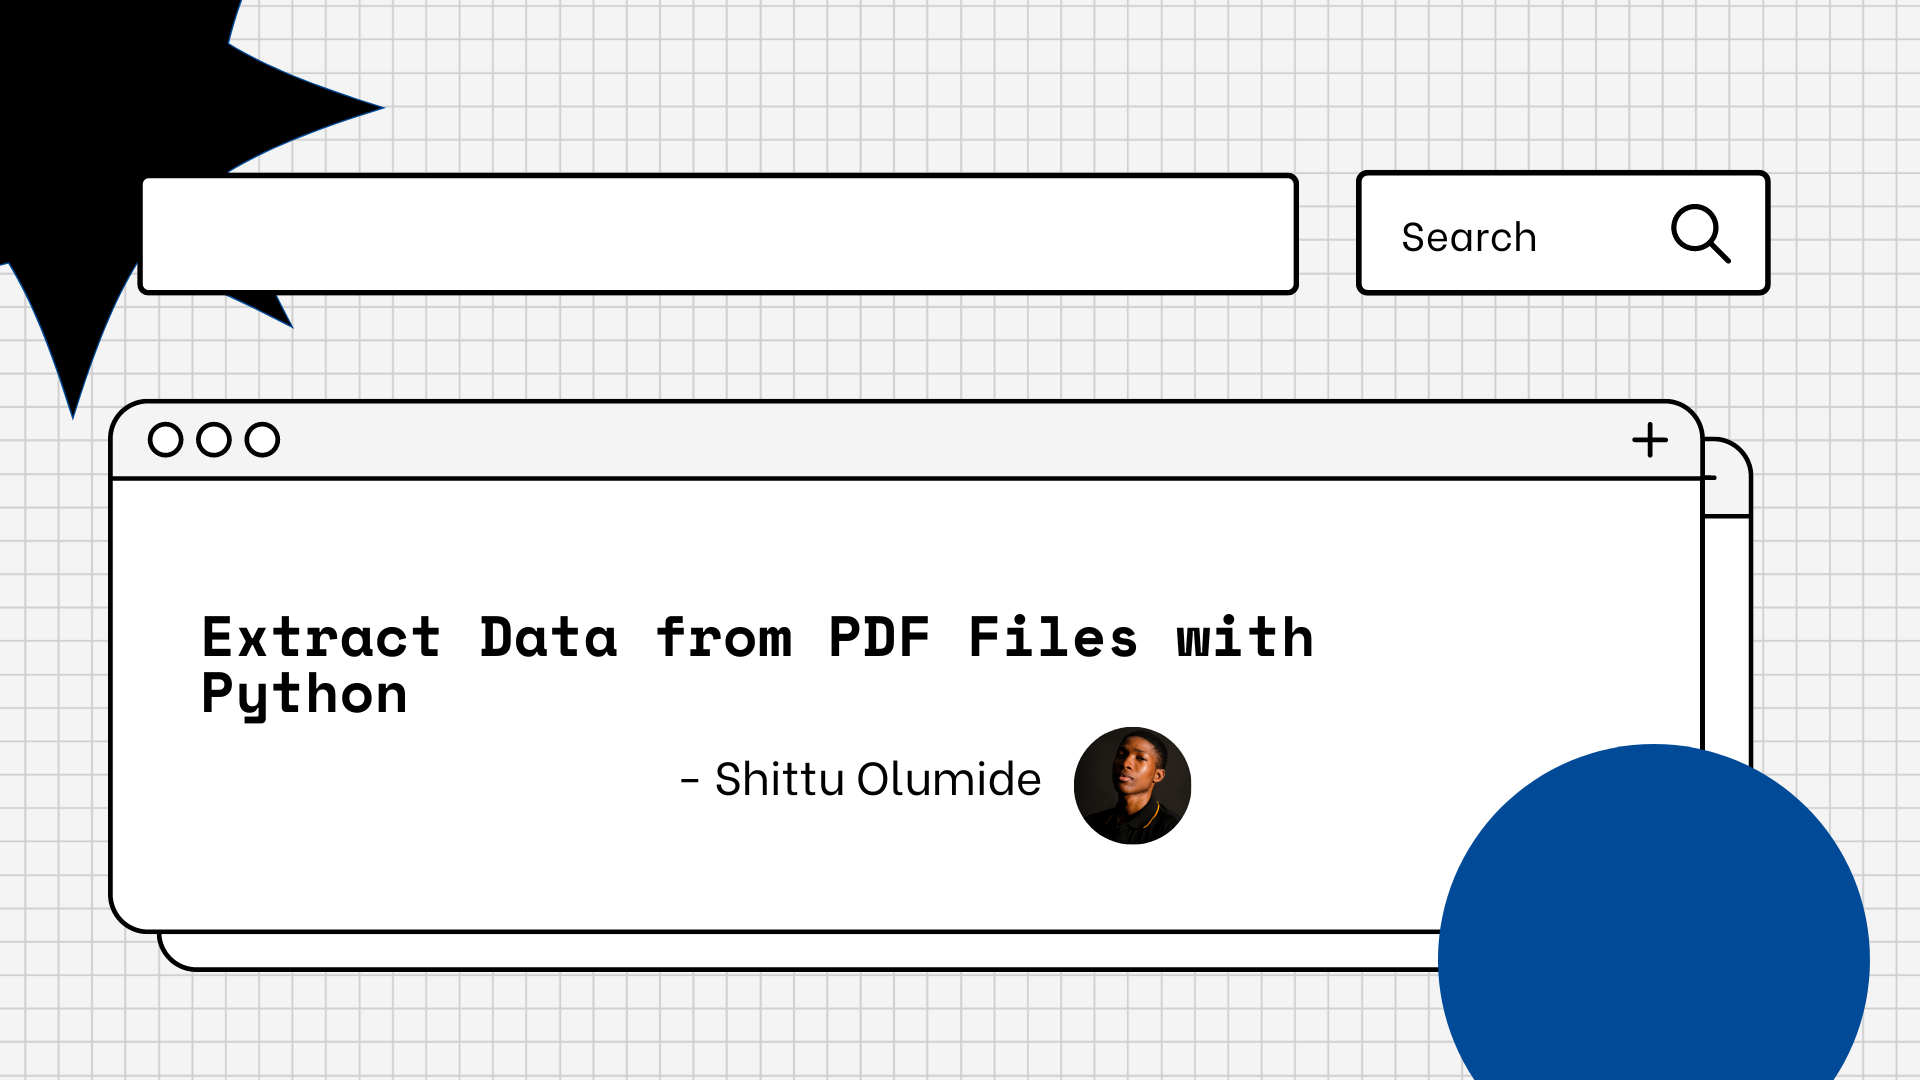 How to Extract Data from PDF Files with Python